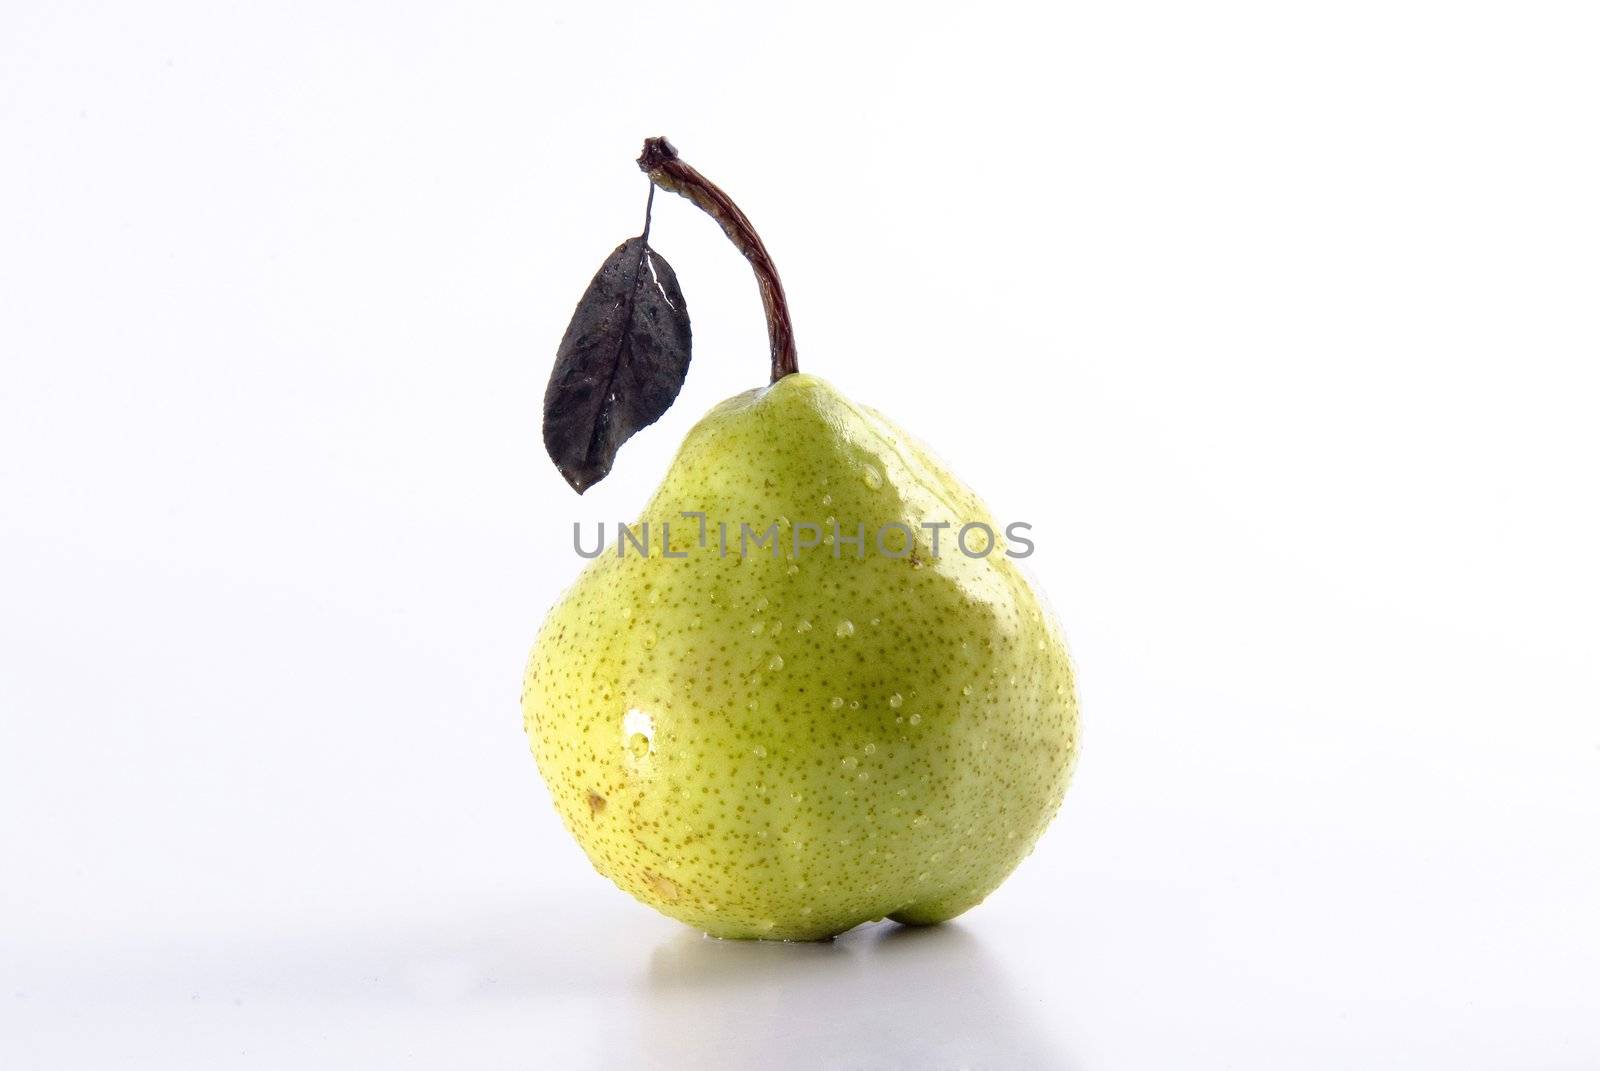 Pear fruit by cienpies